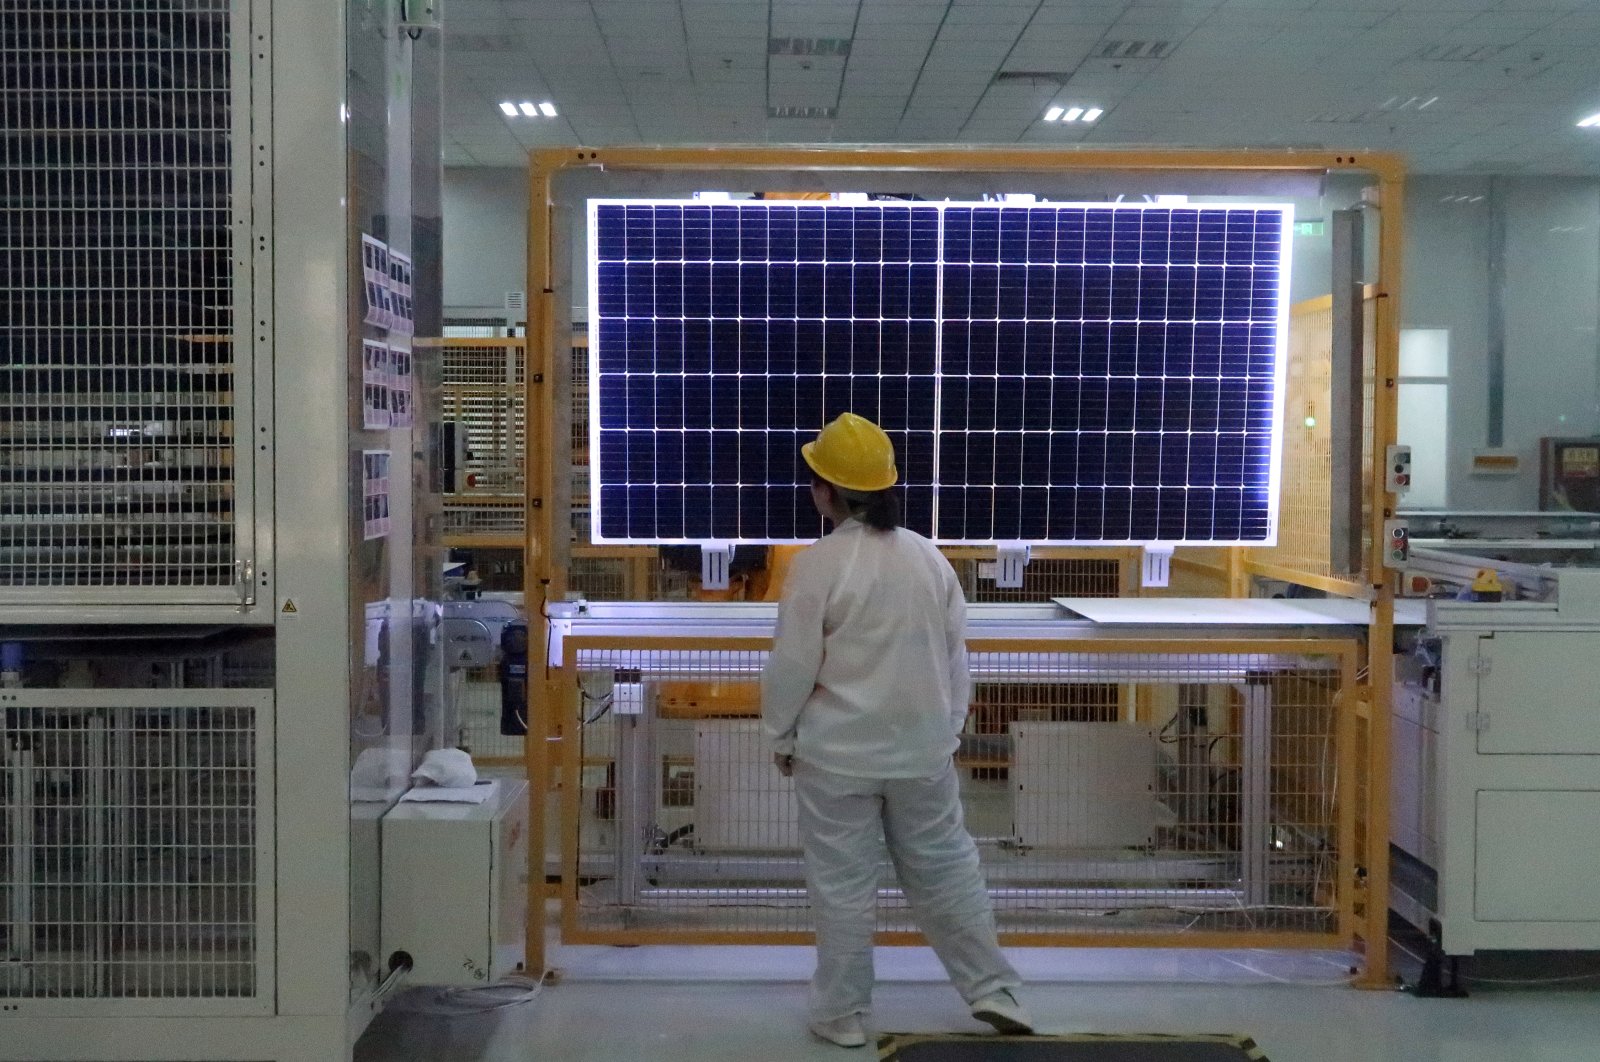 A worker conducts a quality check of a solar module product at a factory of a monocrystalline silicon solar equipment manufacturer LONGi Green Technology Co., in Xian, Shaanxi province, China, Dec. 10, 2019. (Reuters Photo)